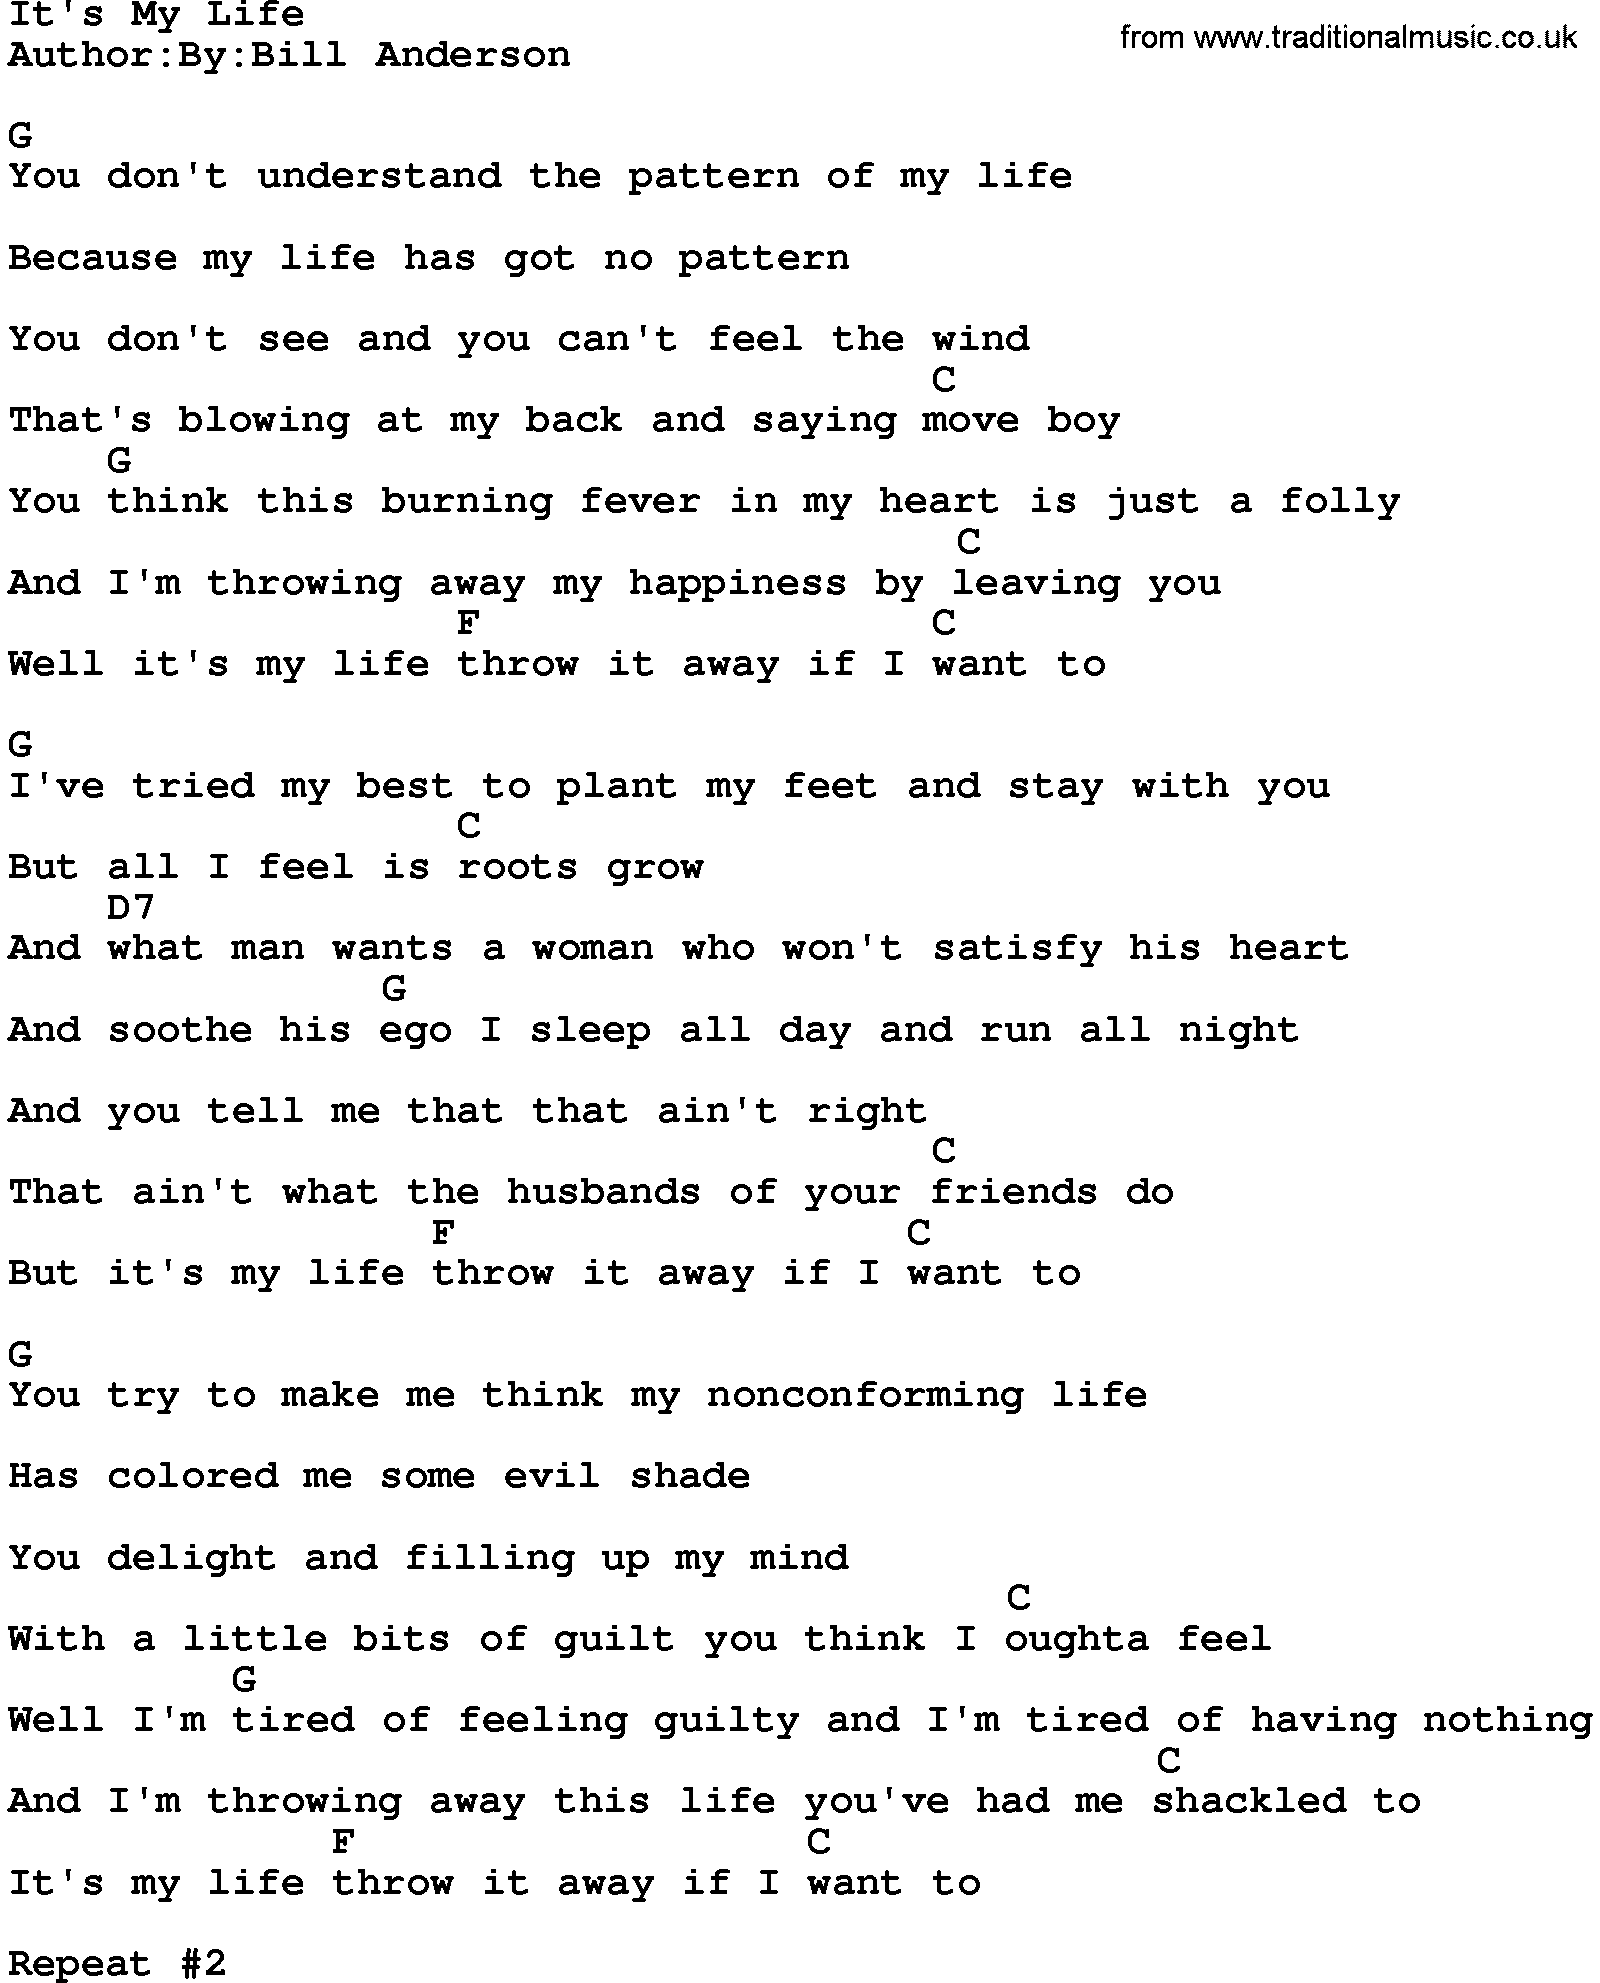 Country music song: It's My Life lyrics and chords